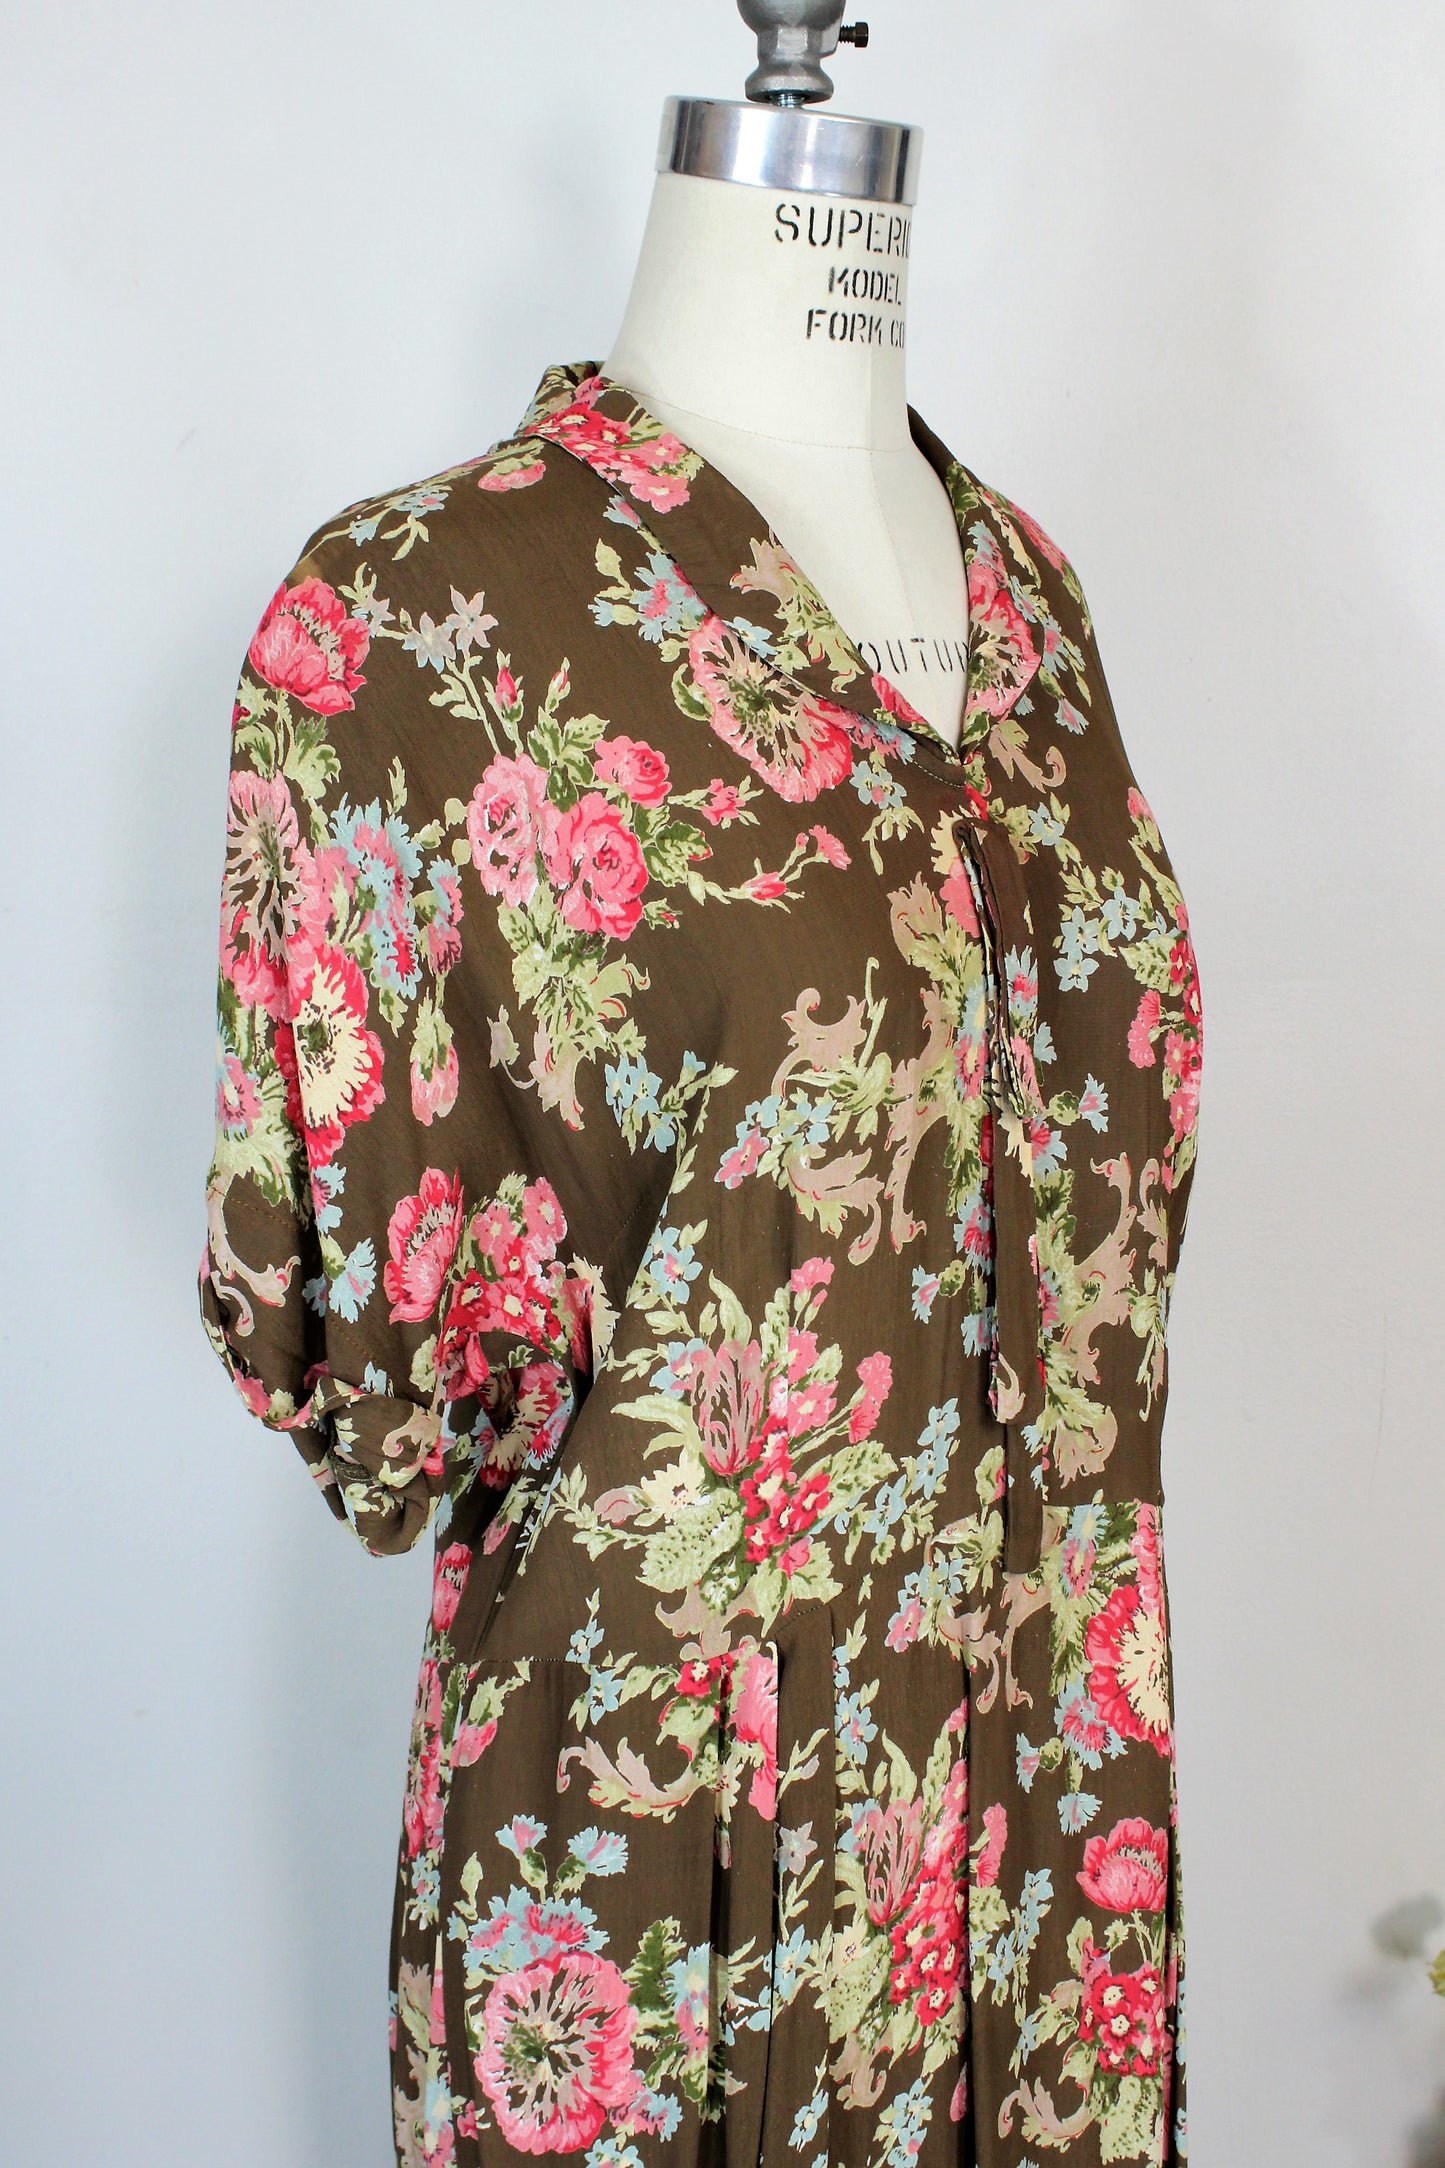 Vintage 1980s Does 1940s Floral Print Rayon Dress